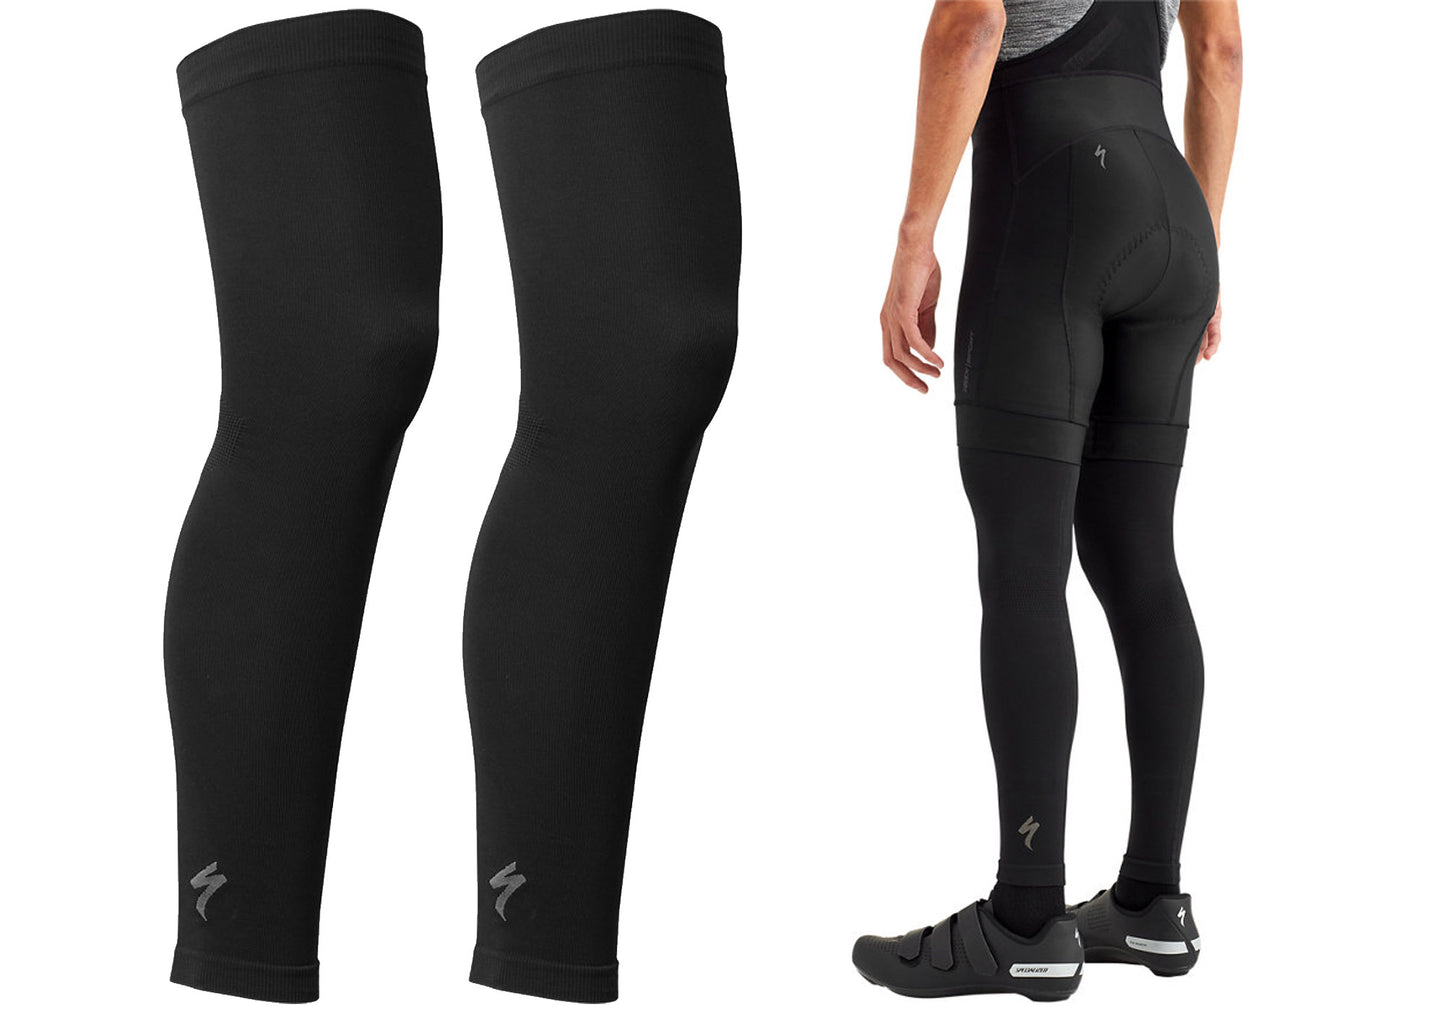 Specialized Unisex Therminal Engineered Leg Warmers buy online at Woolys Wheels Sydney